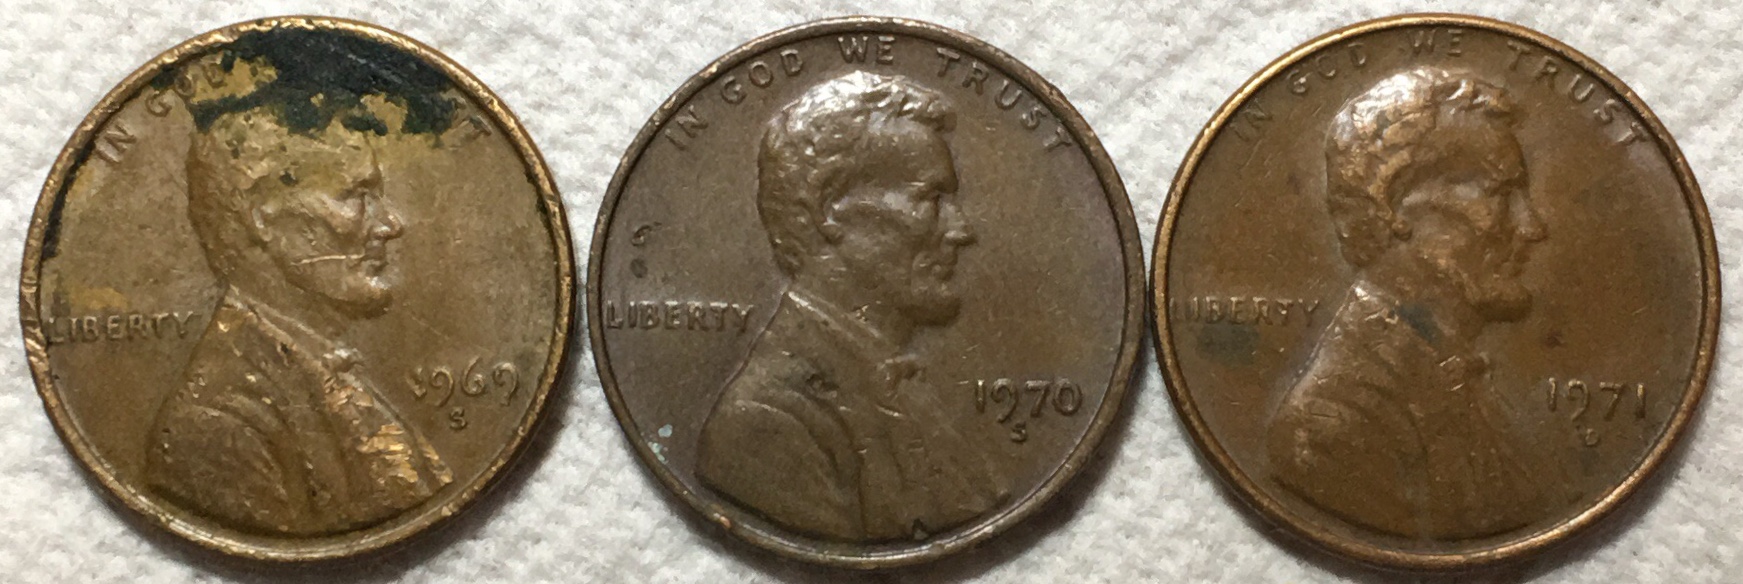 1970 D Lincoln Cent Struck Thru Grease Floating Roof Error Etc